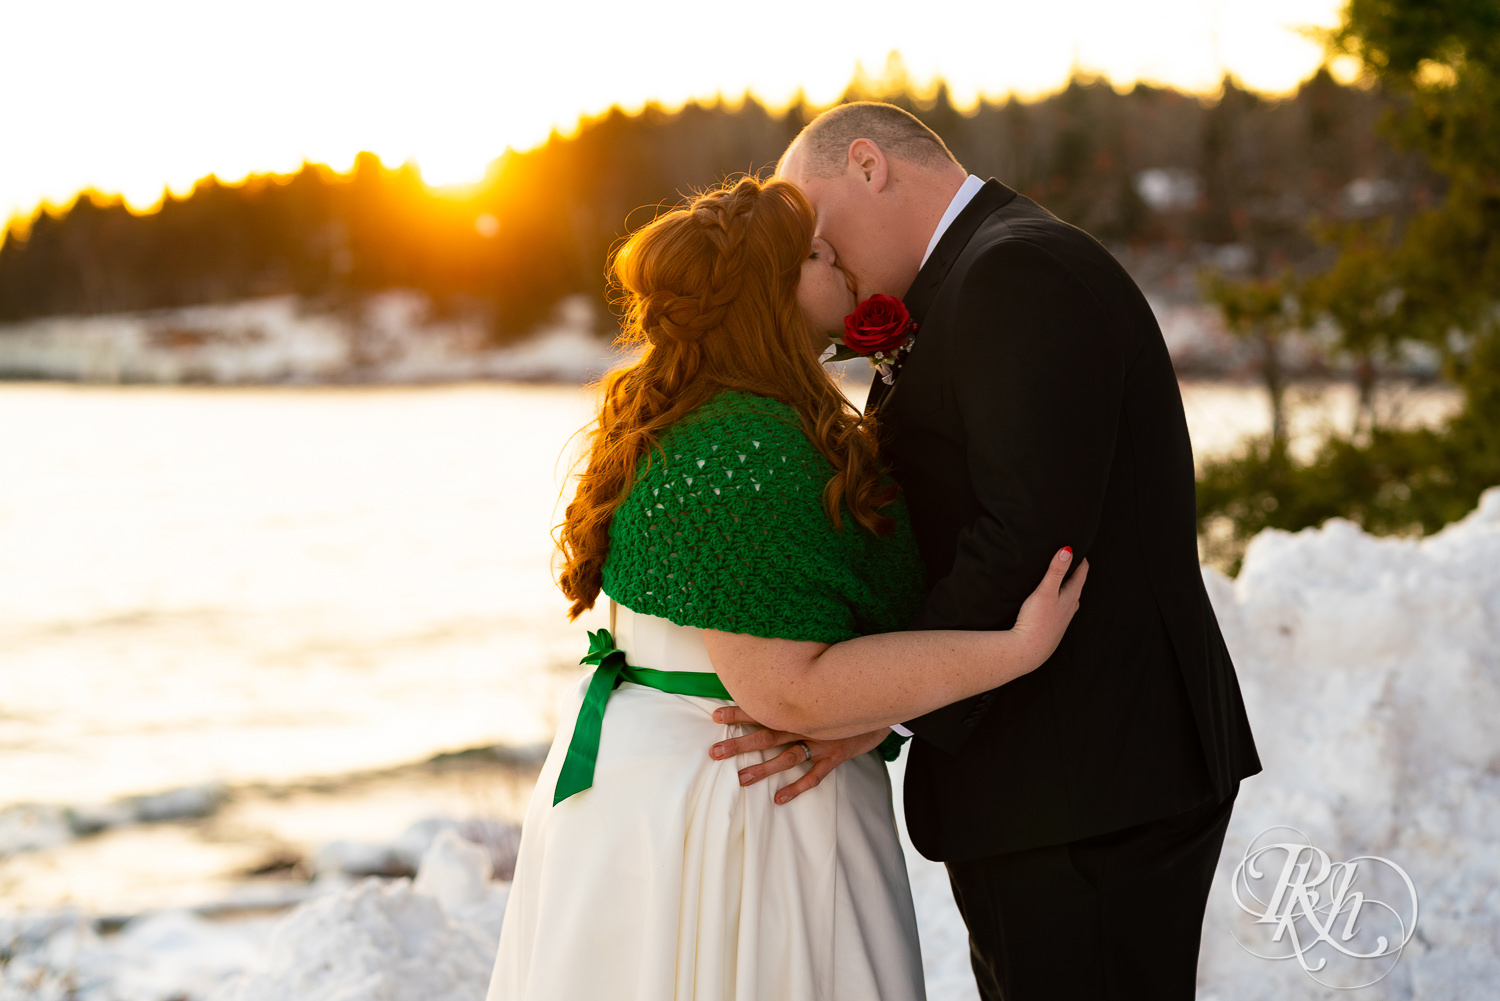 Bride and groom kiss at sunset in the snow at Grand Superior Lodge in Two Harbors, Minnesota.